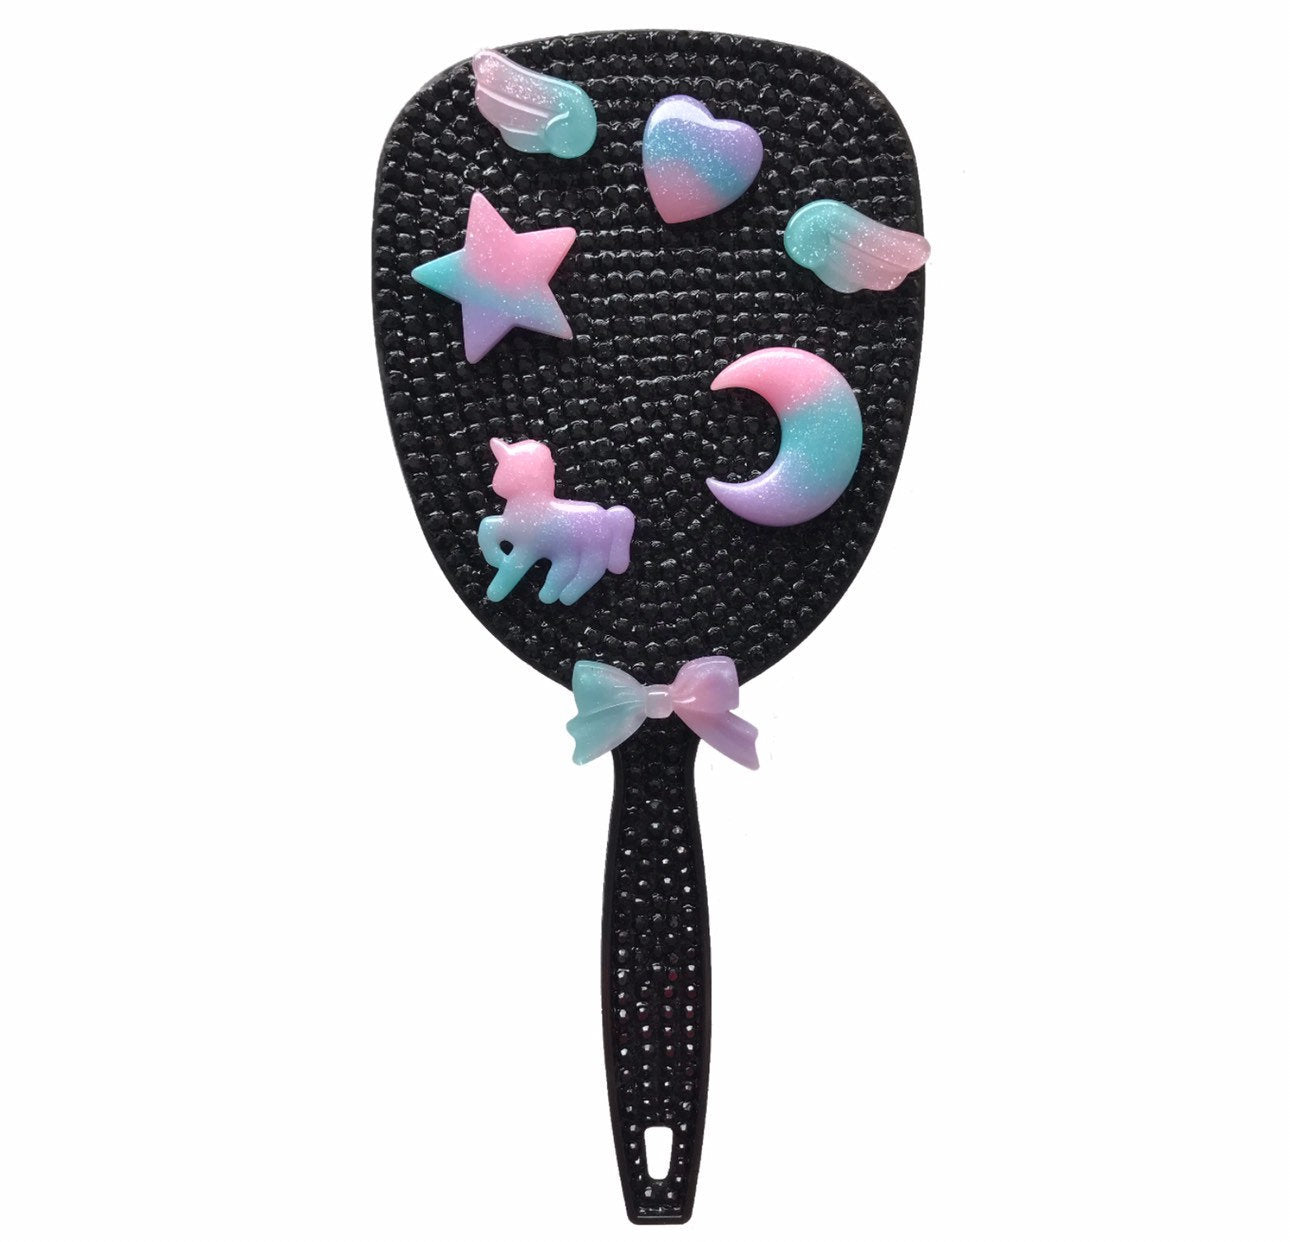 Whimsical Themed Make Up Glam Handheld Mirror with Black Bling